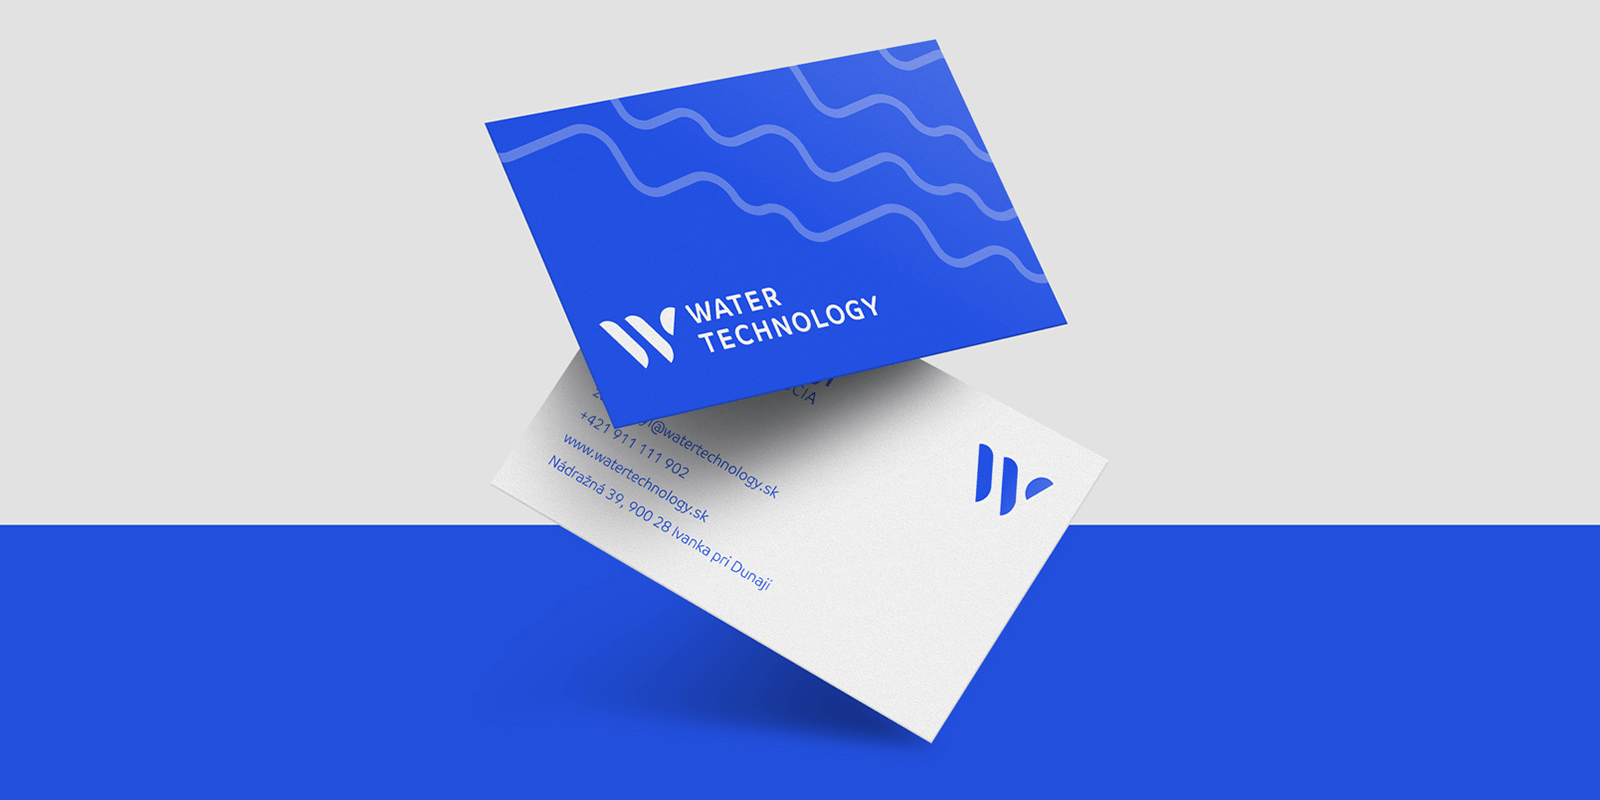 Water Technology Oliver Cowan Graphic Design Freelance Graphic And Web Designer Based In Exeter